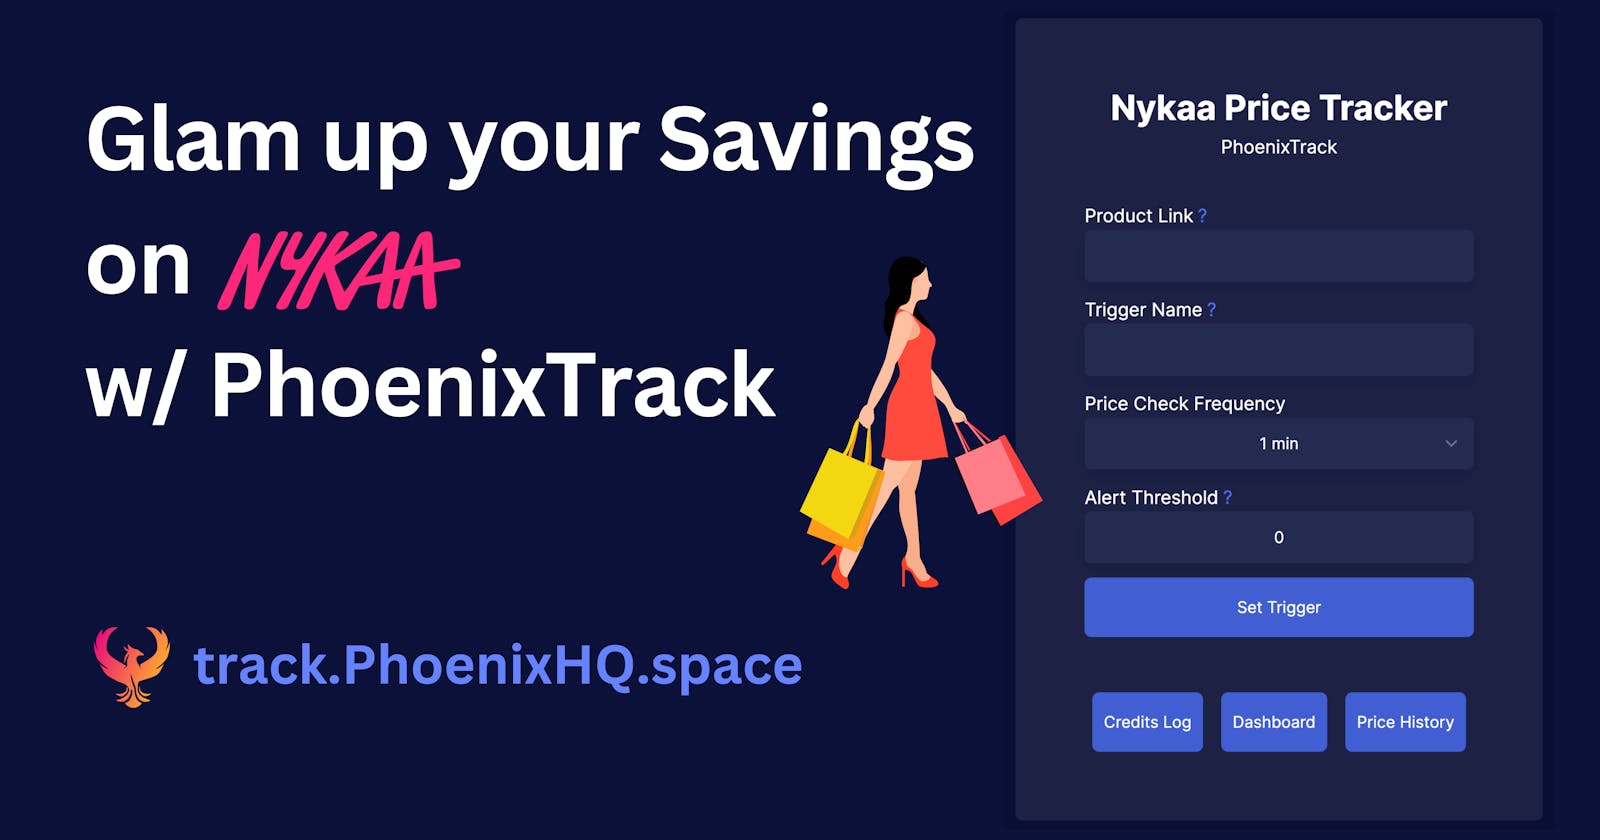 Cover Image for Glam Up your Savings on Nykaa with PhoenixTrack